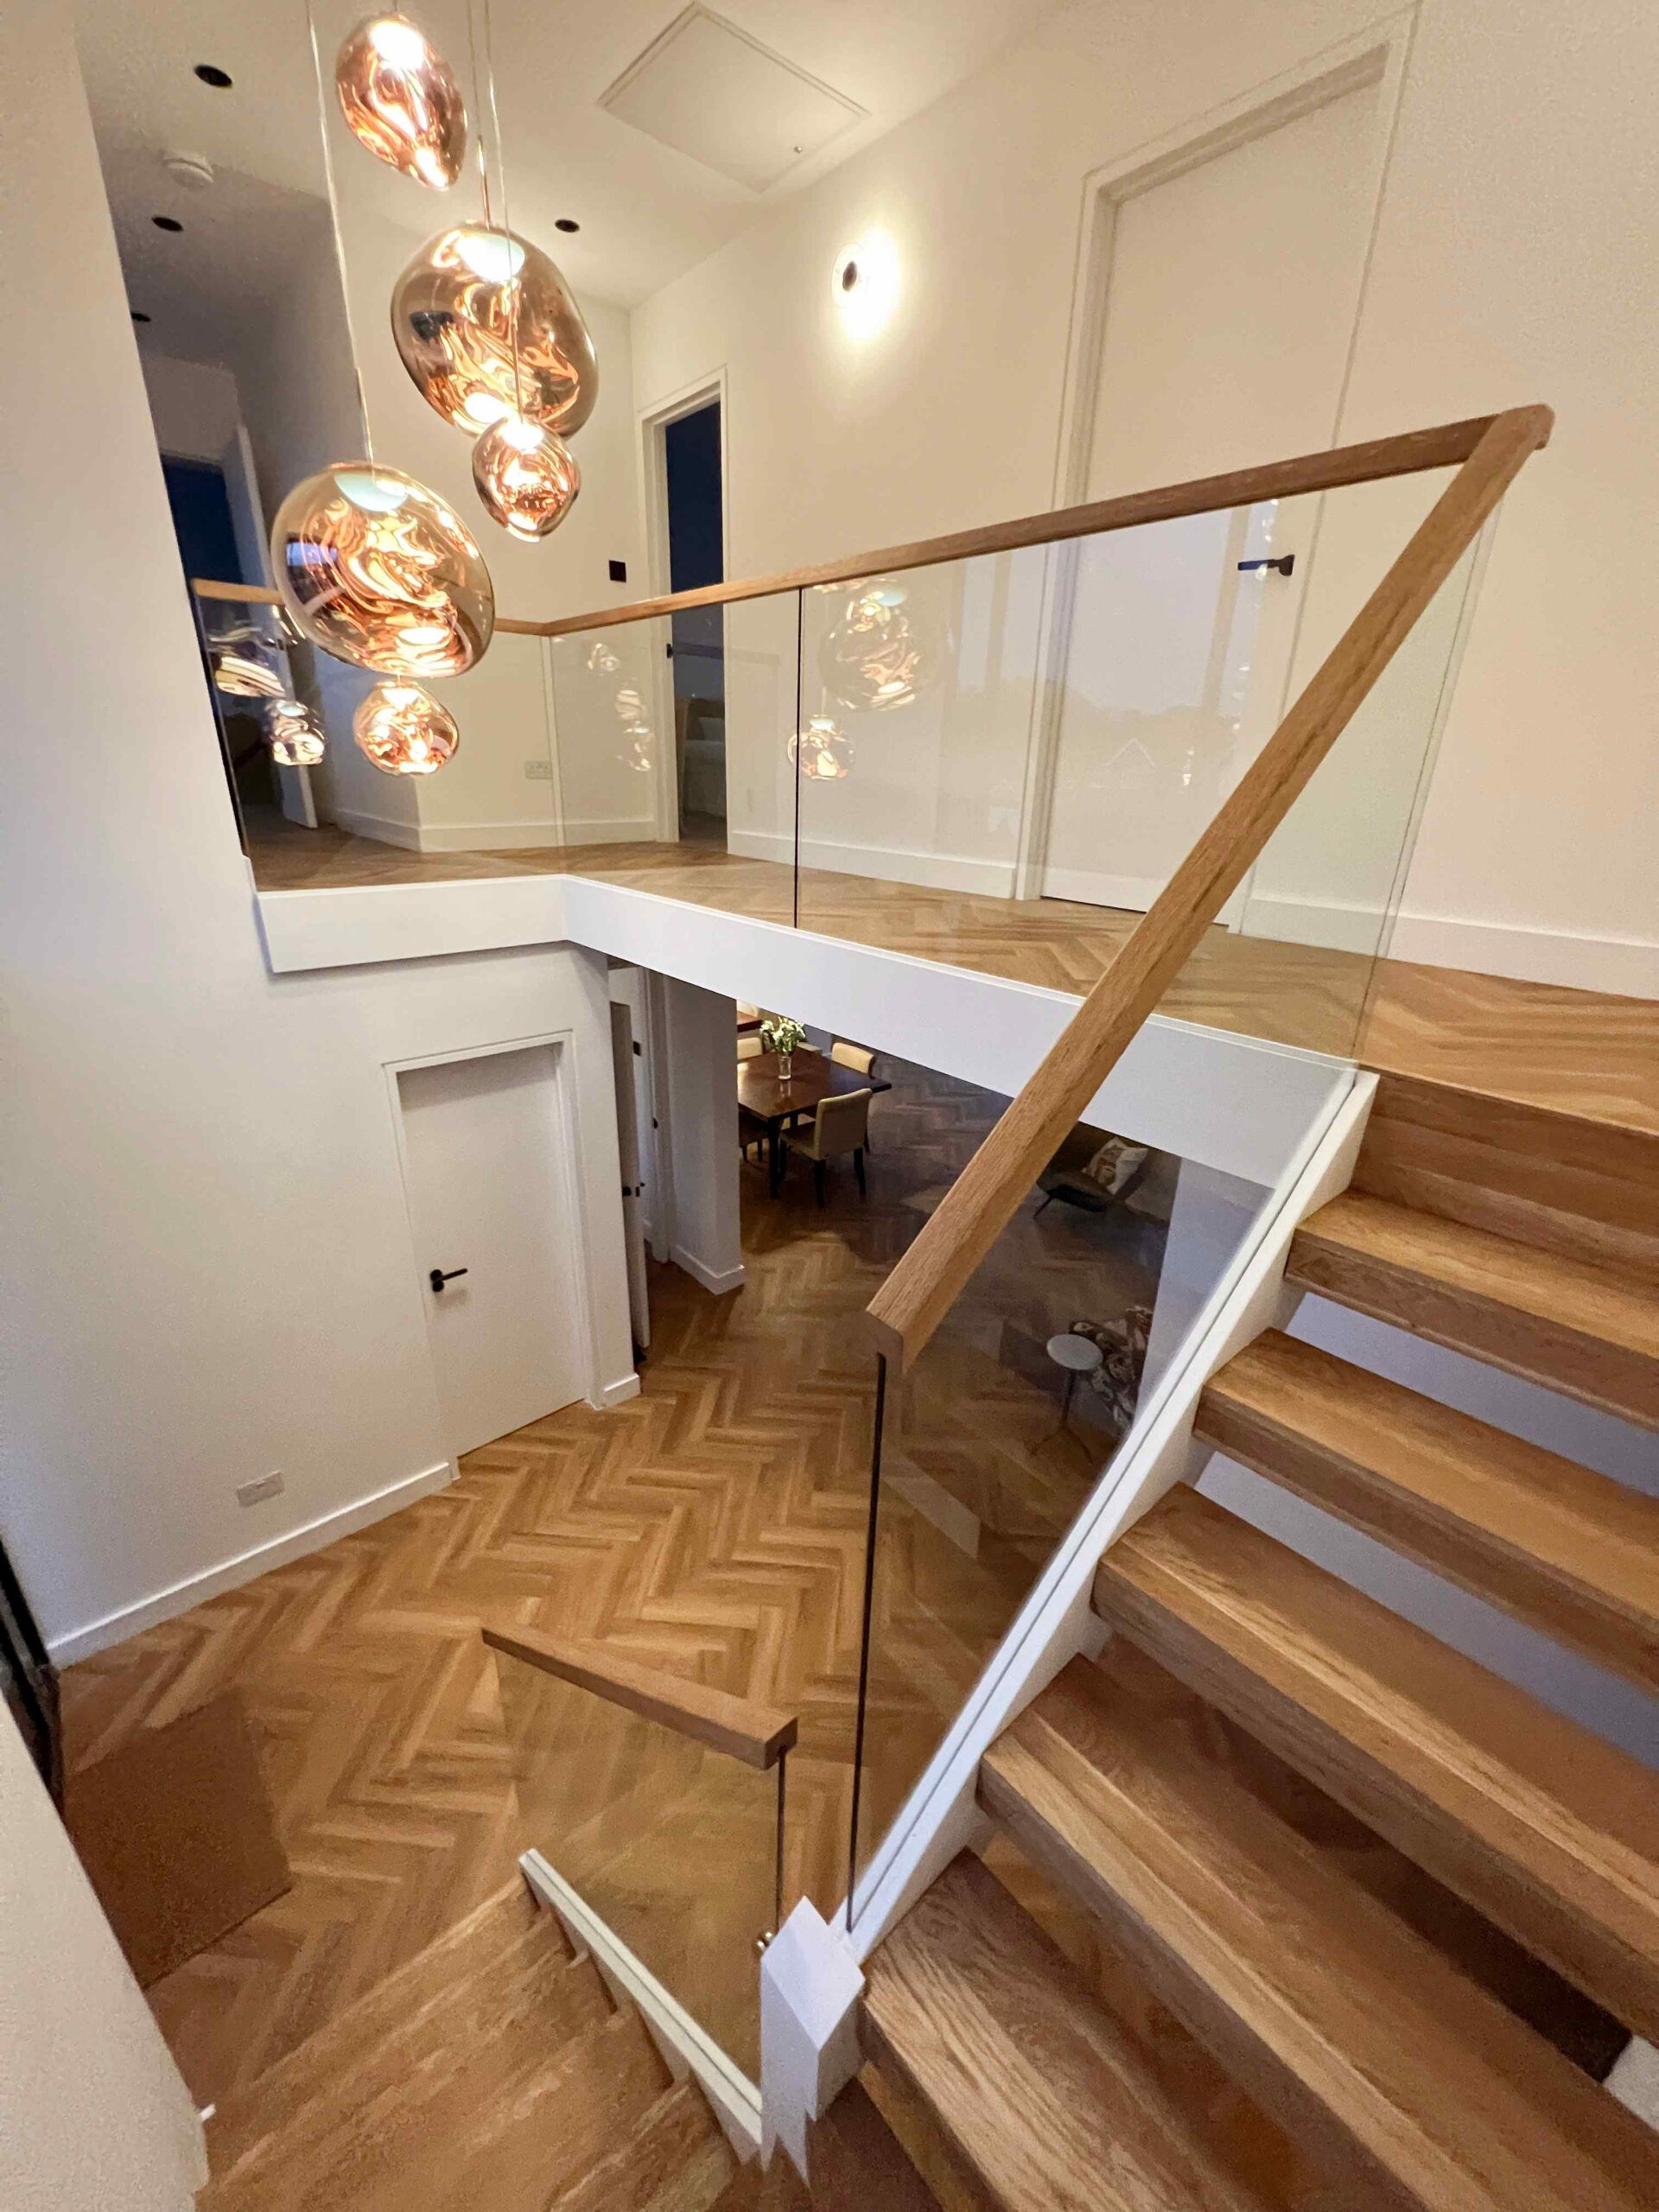 Floating staircase with glass balustrade, oak handrail on top